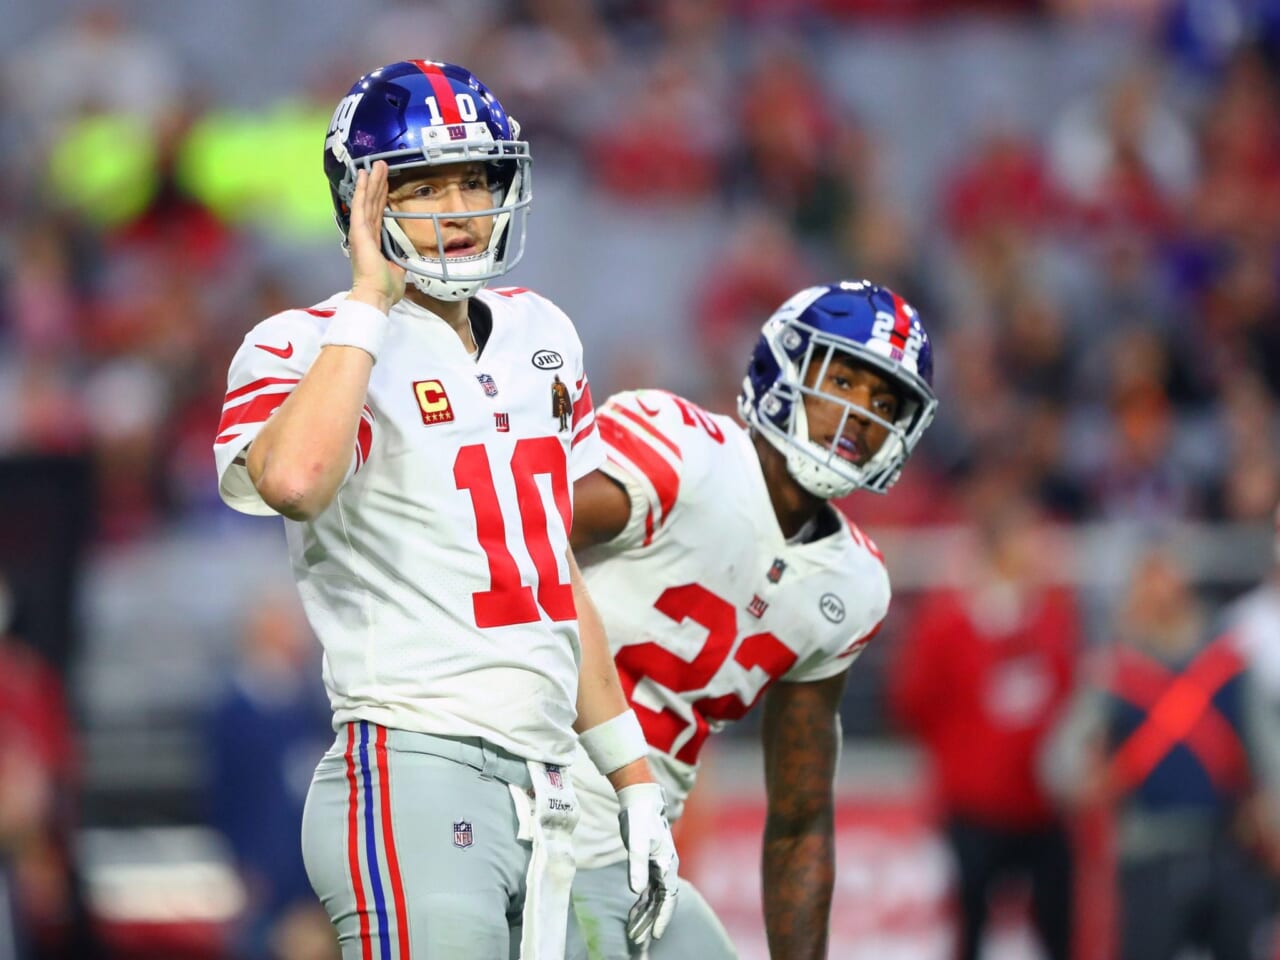 New York Giants: Ben McAdoo At Peace With Benching Eli Manning